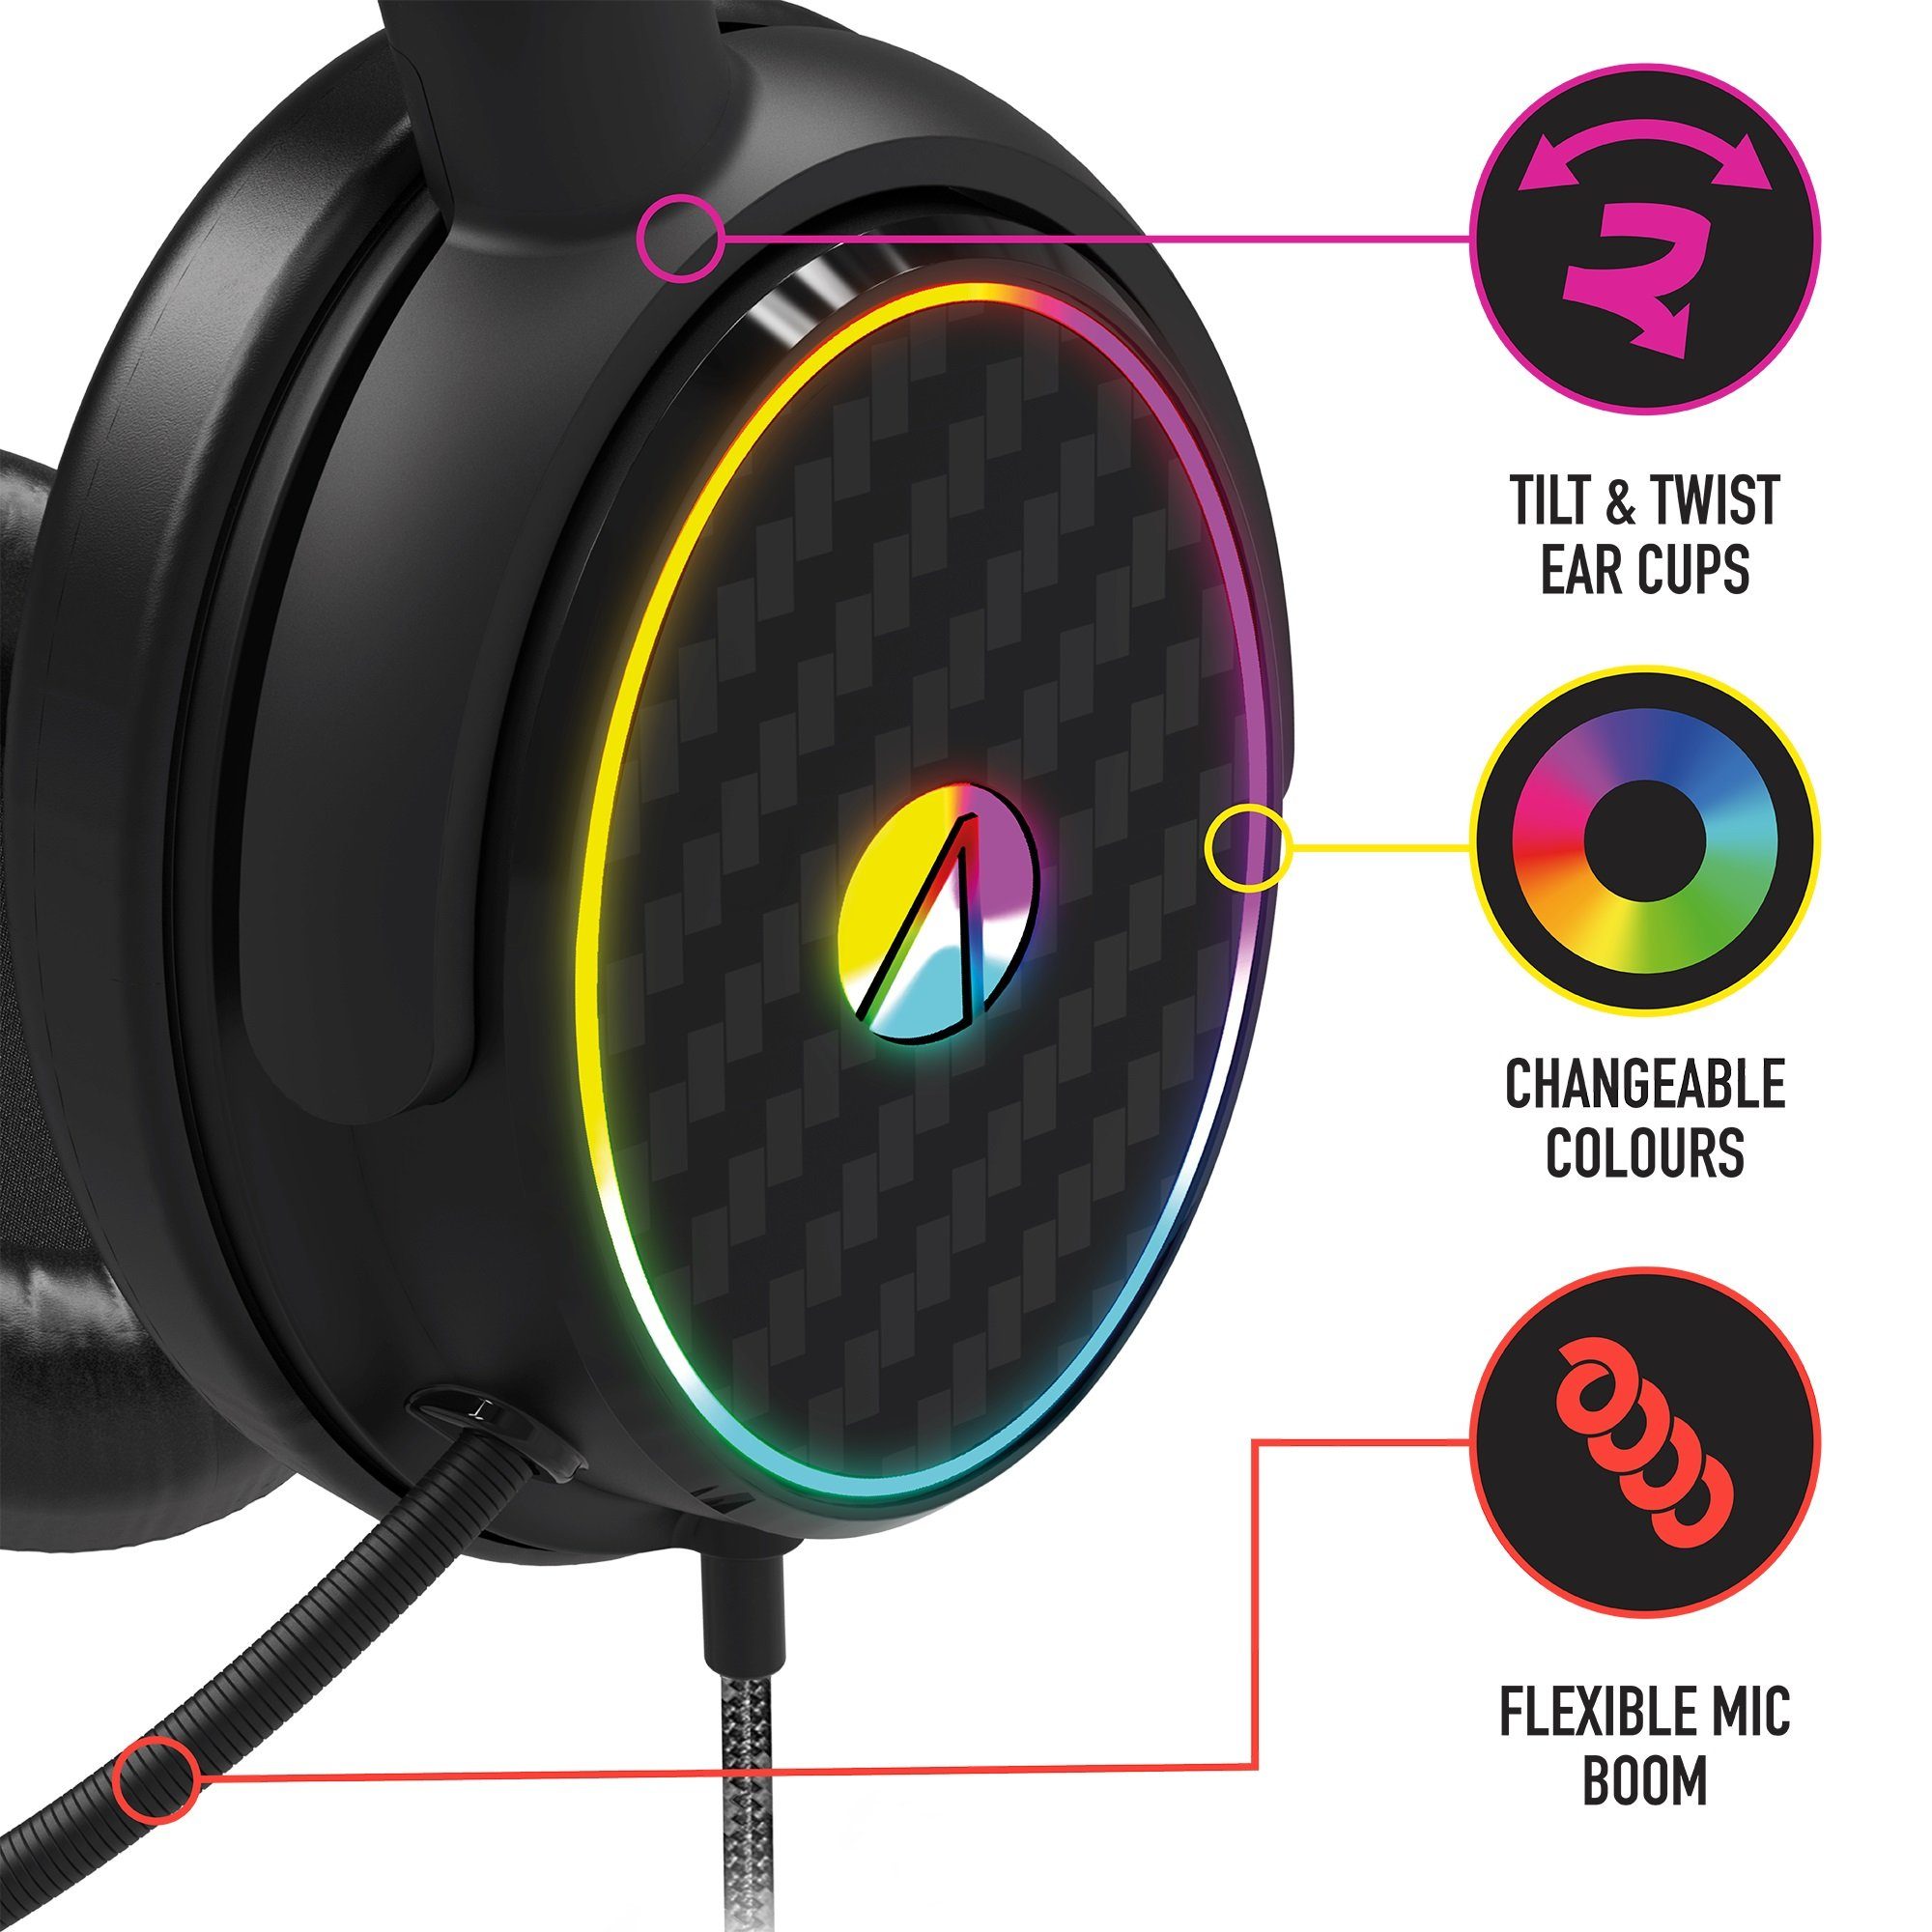 Beleuchtung Gaming (Plastikfreie Gaming-Headset Stereo Stealth LED Headset Verpackung) C6-100 mit